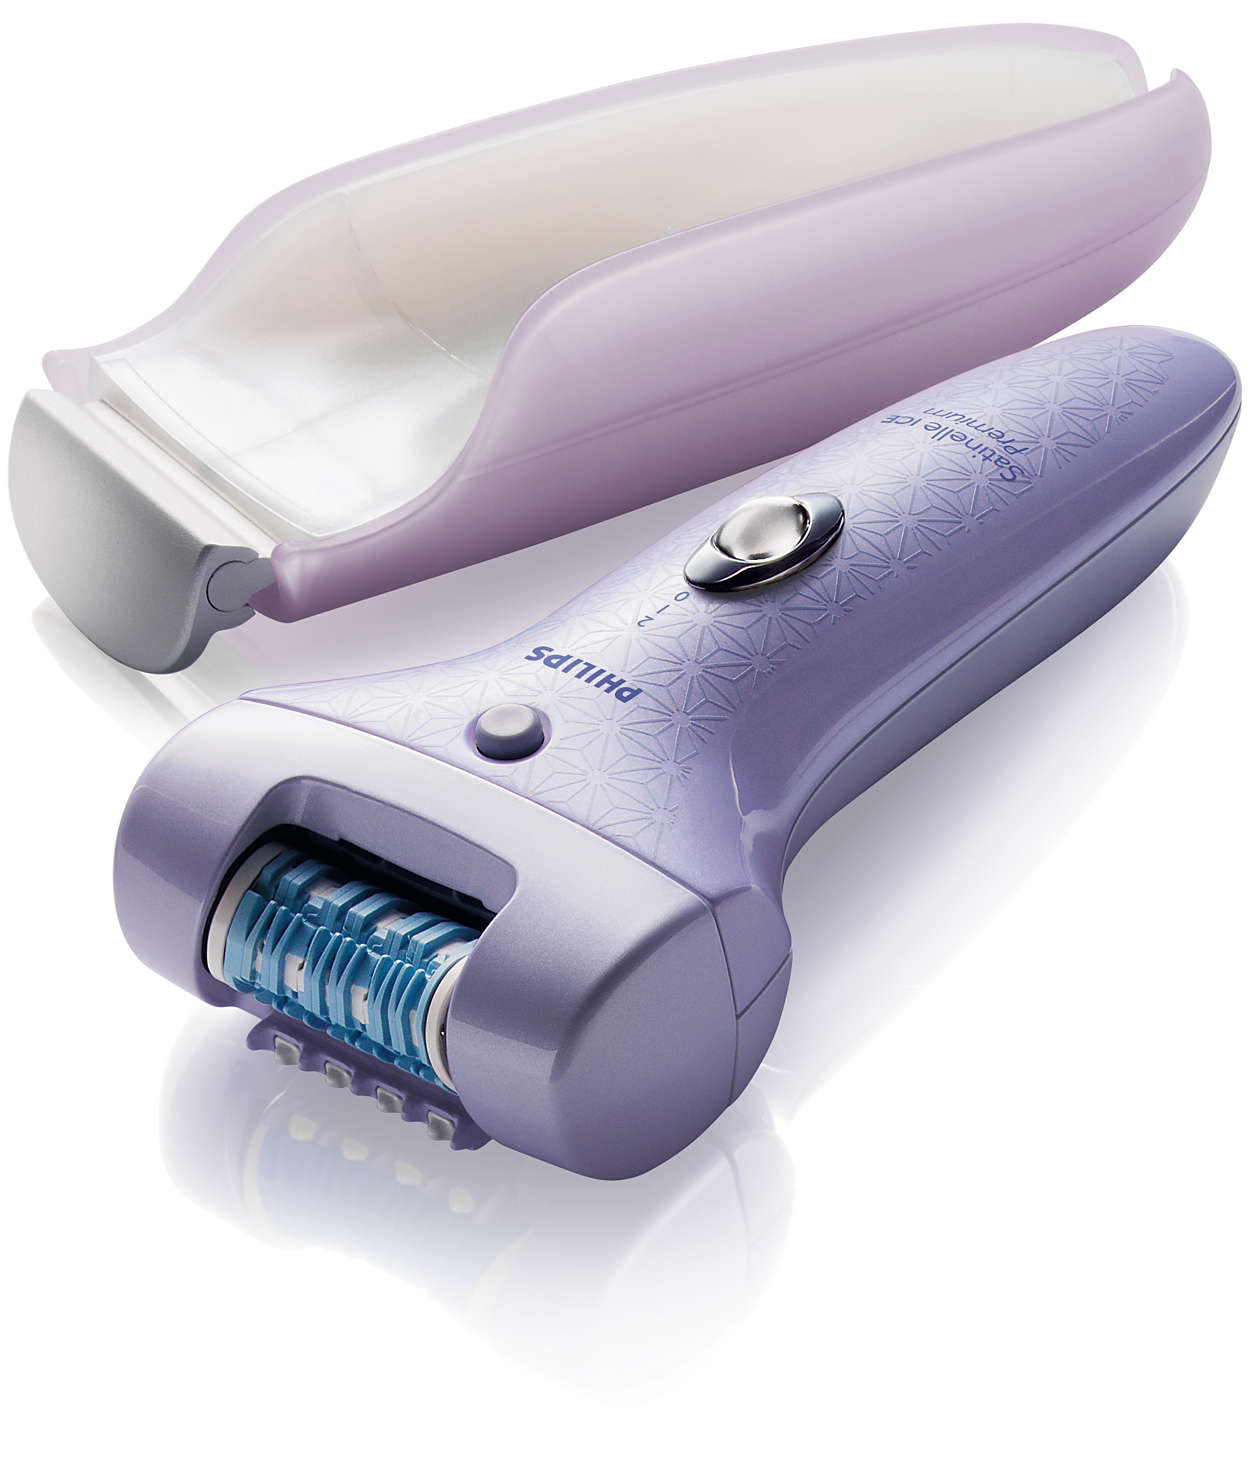 Our most gentle epilator